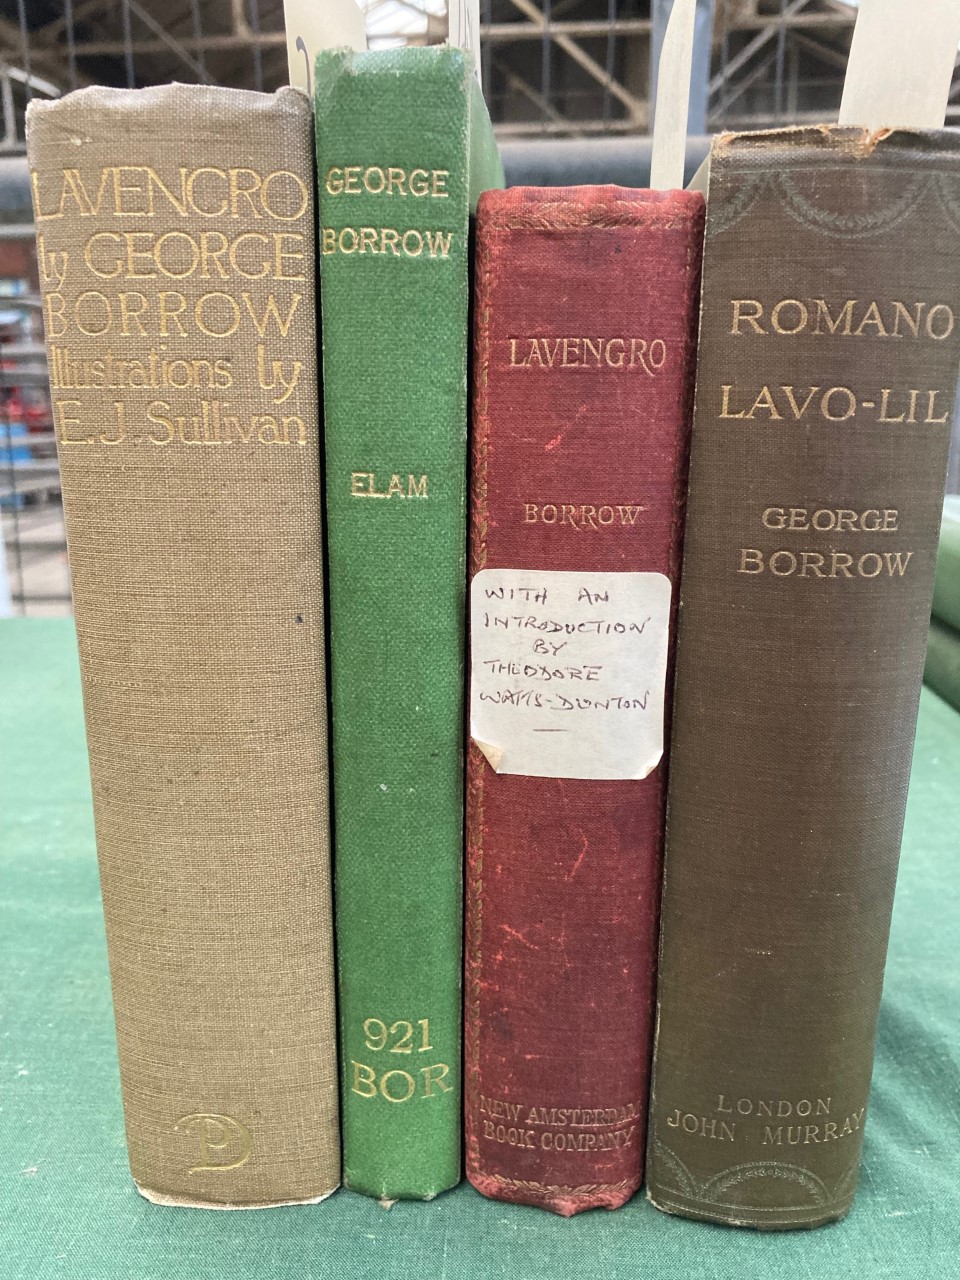 George Borrow: 'Lavengro', 1900; and 3 other Romany books